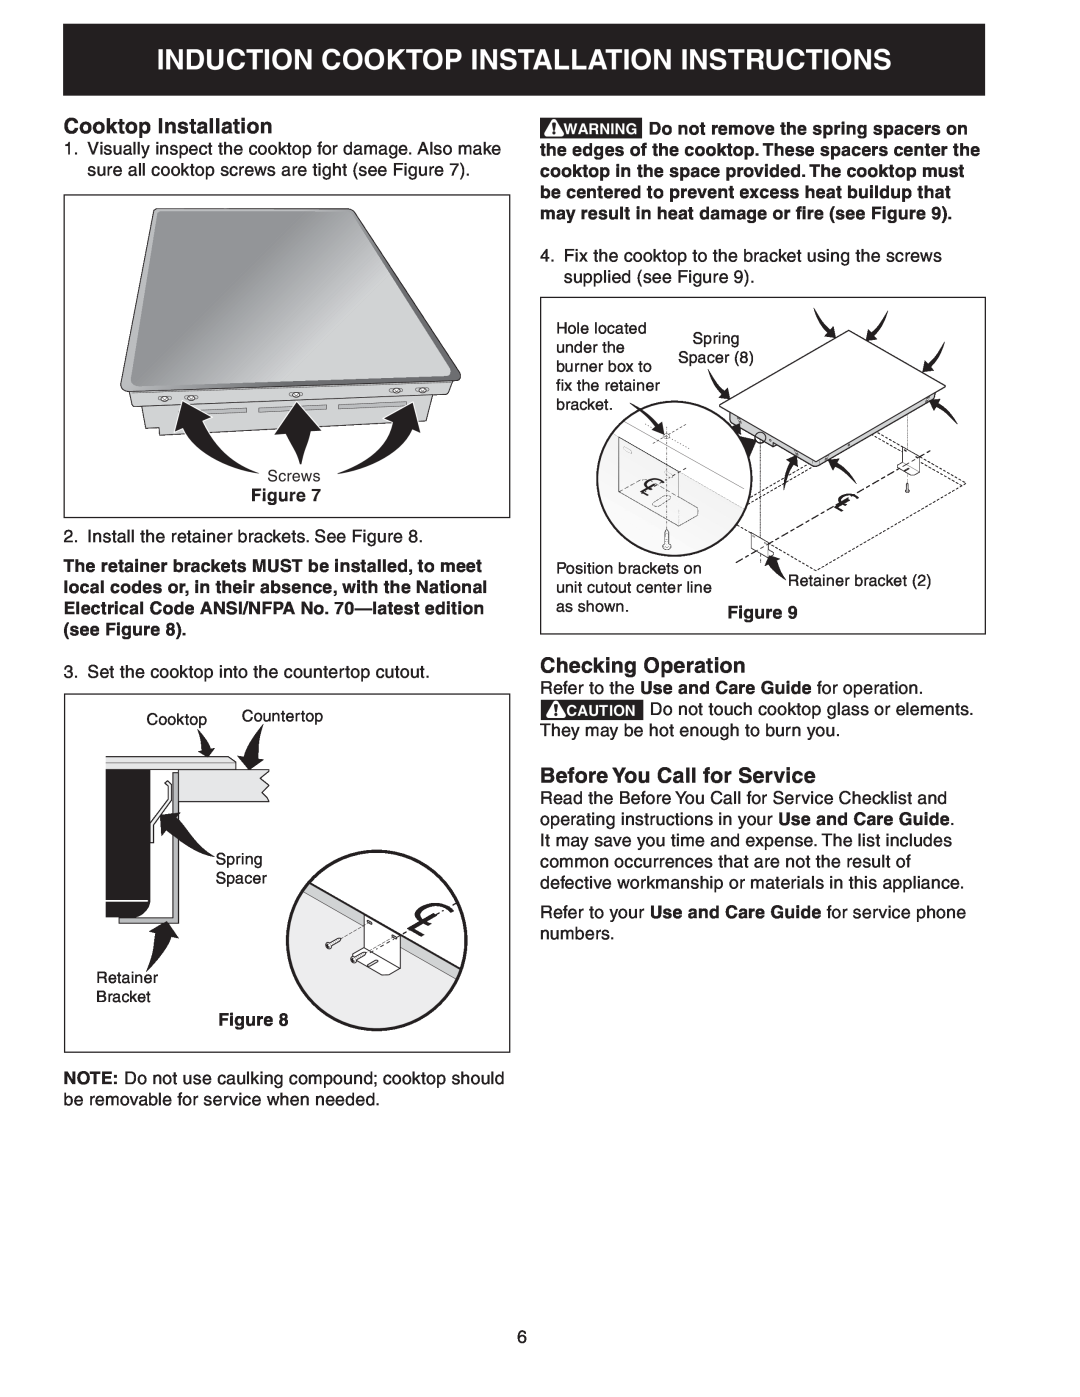 Frigidaire 318205412 installation instructions Cooktop Installation, Checking Operation, Before You Call for Service 